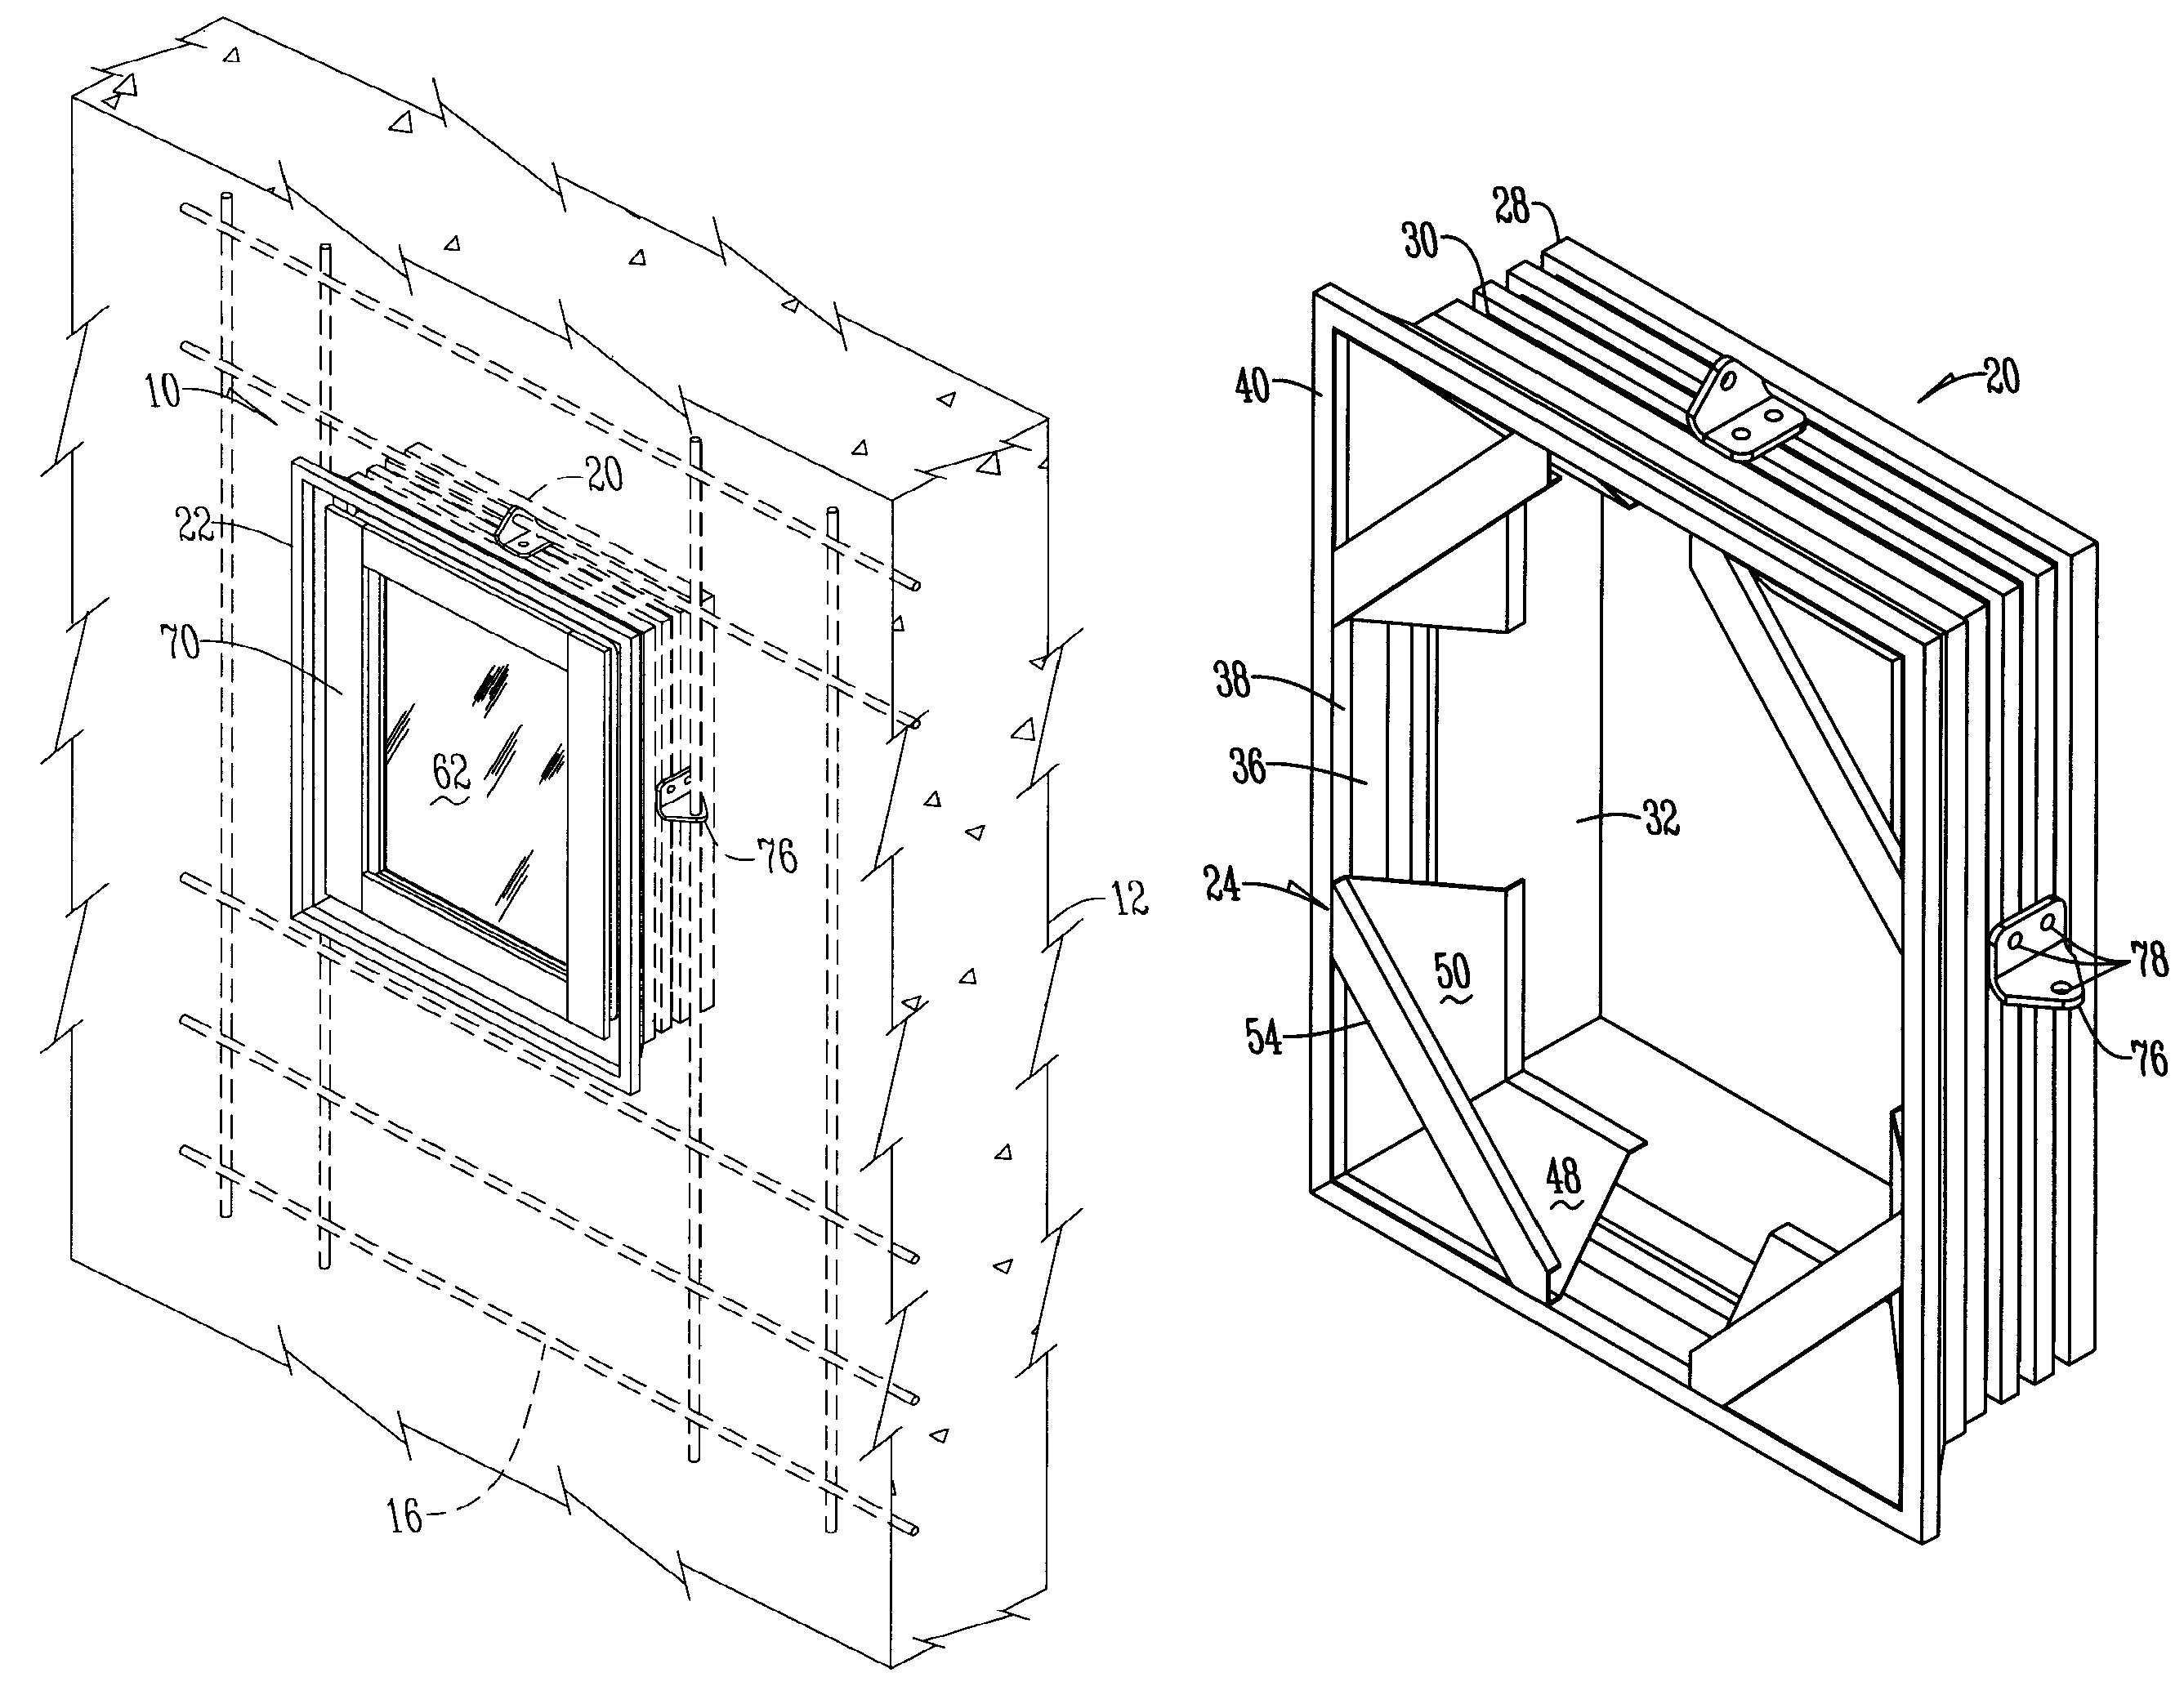 Method of installing windows into a concrete structure